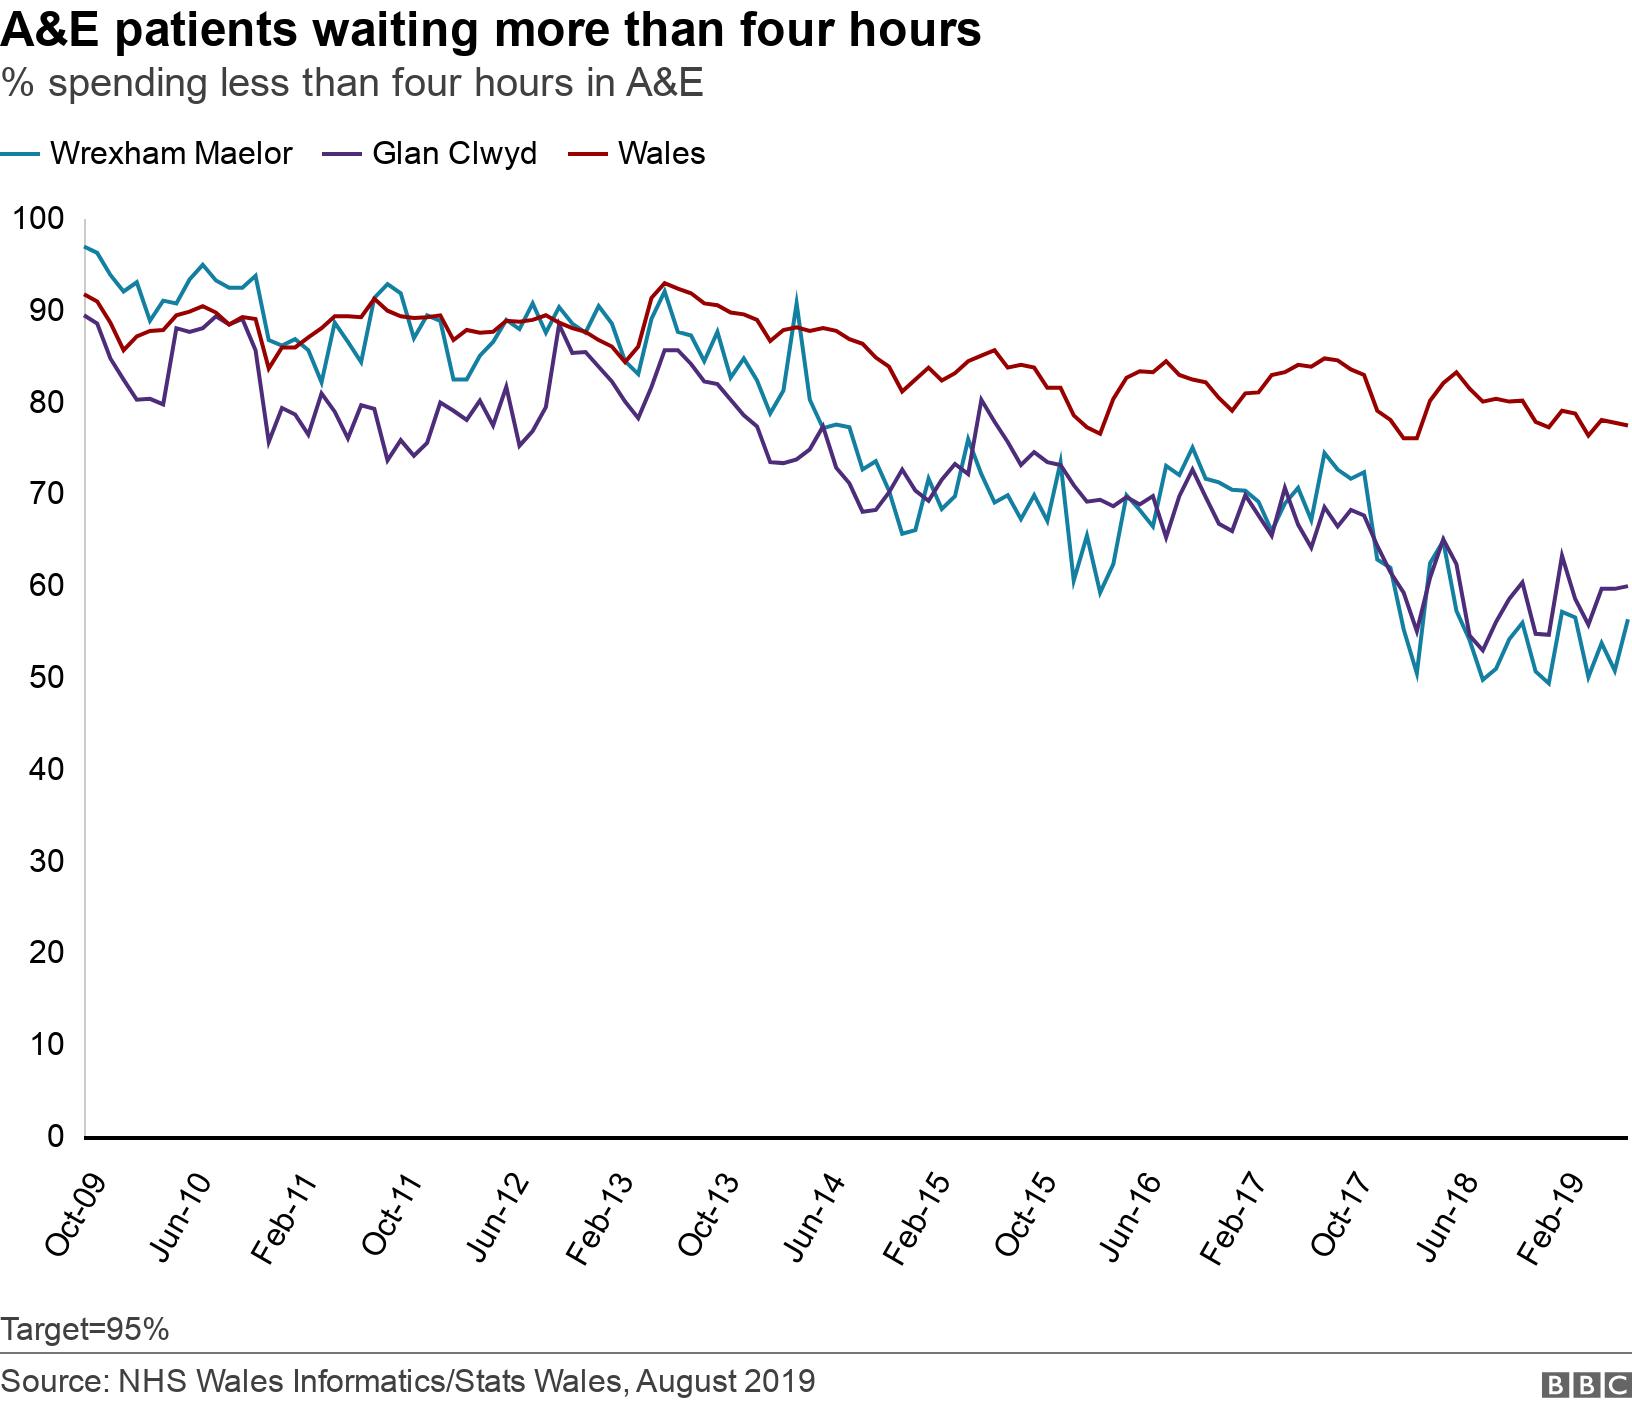 A&E patients waiting more than four hours. % spending less than four hours in A&E.  Target=95%.